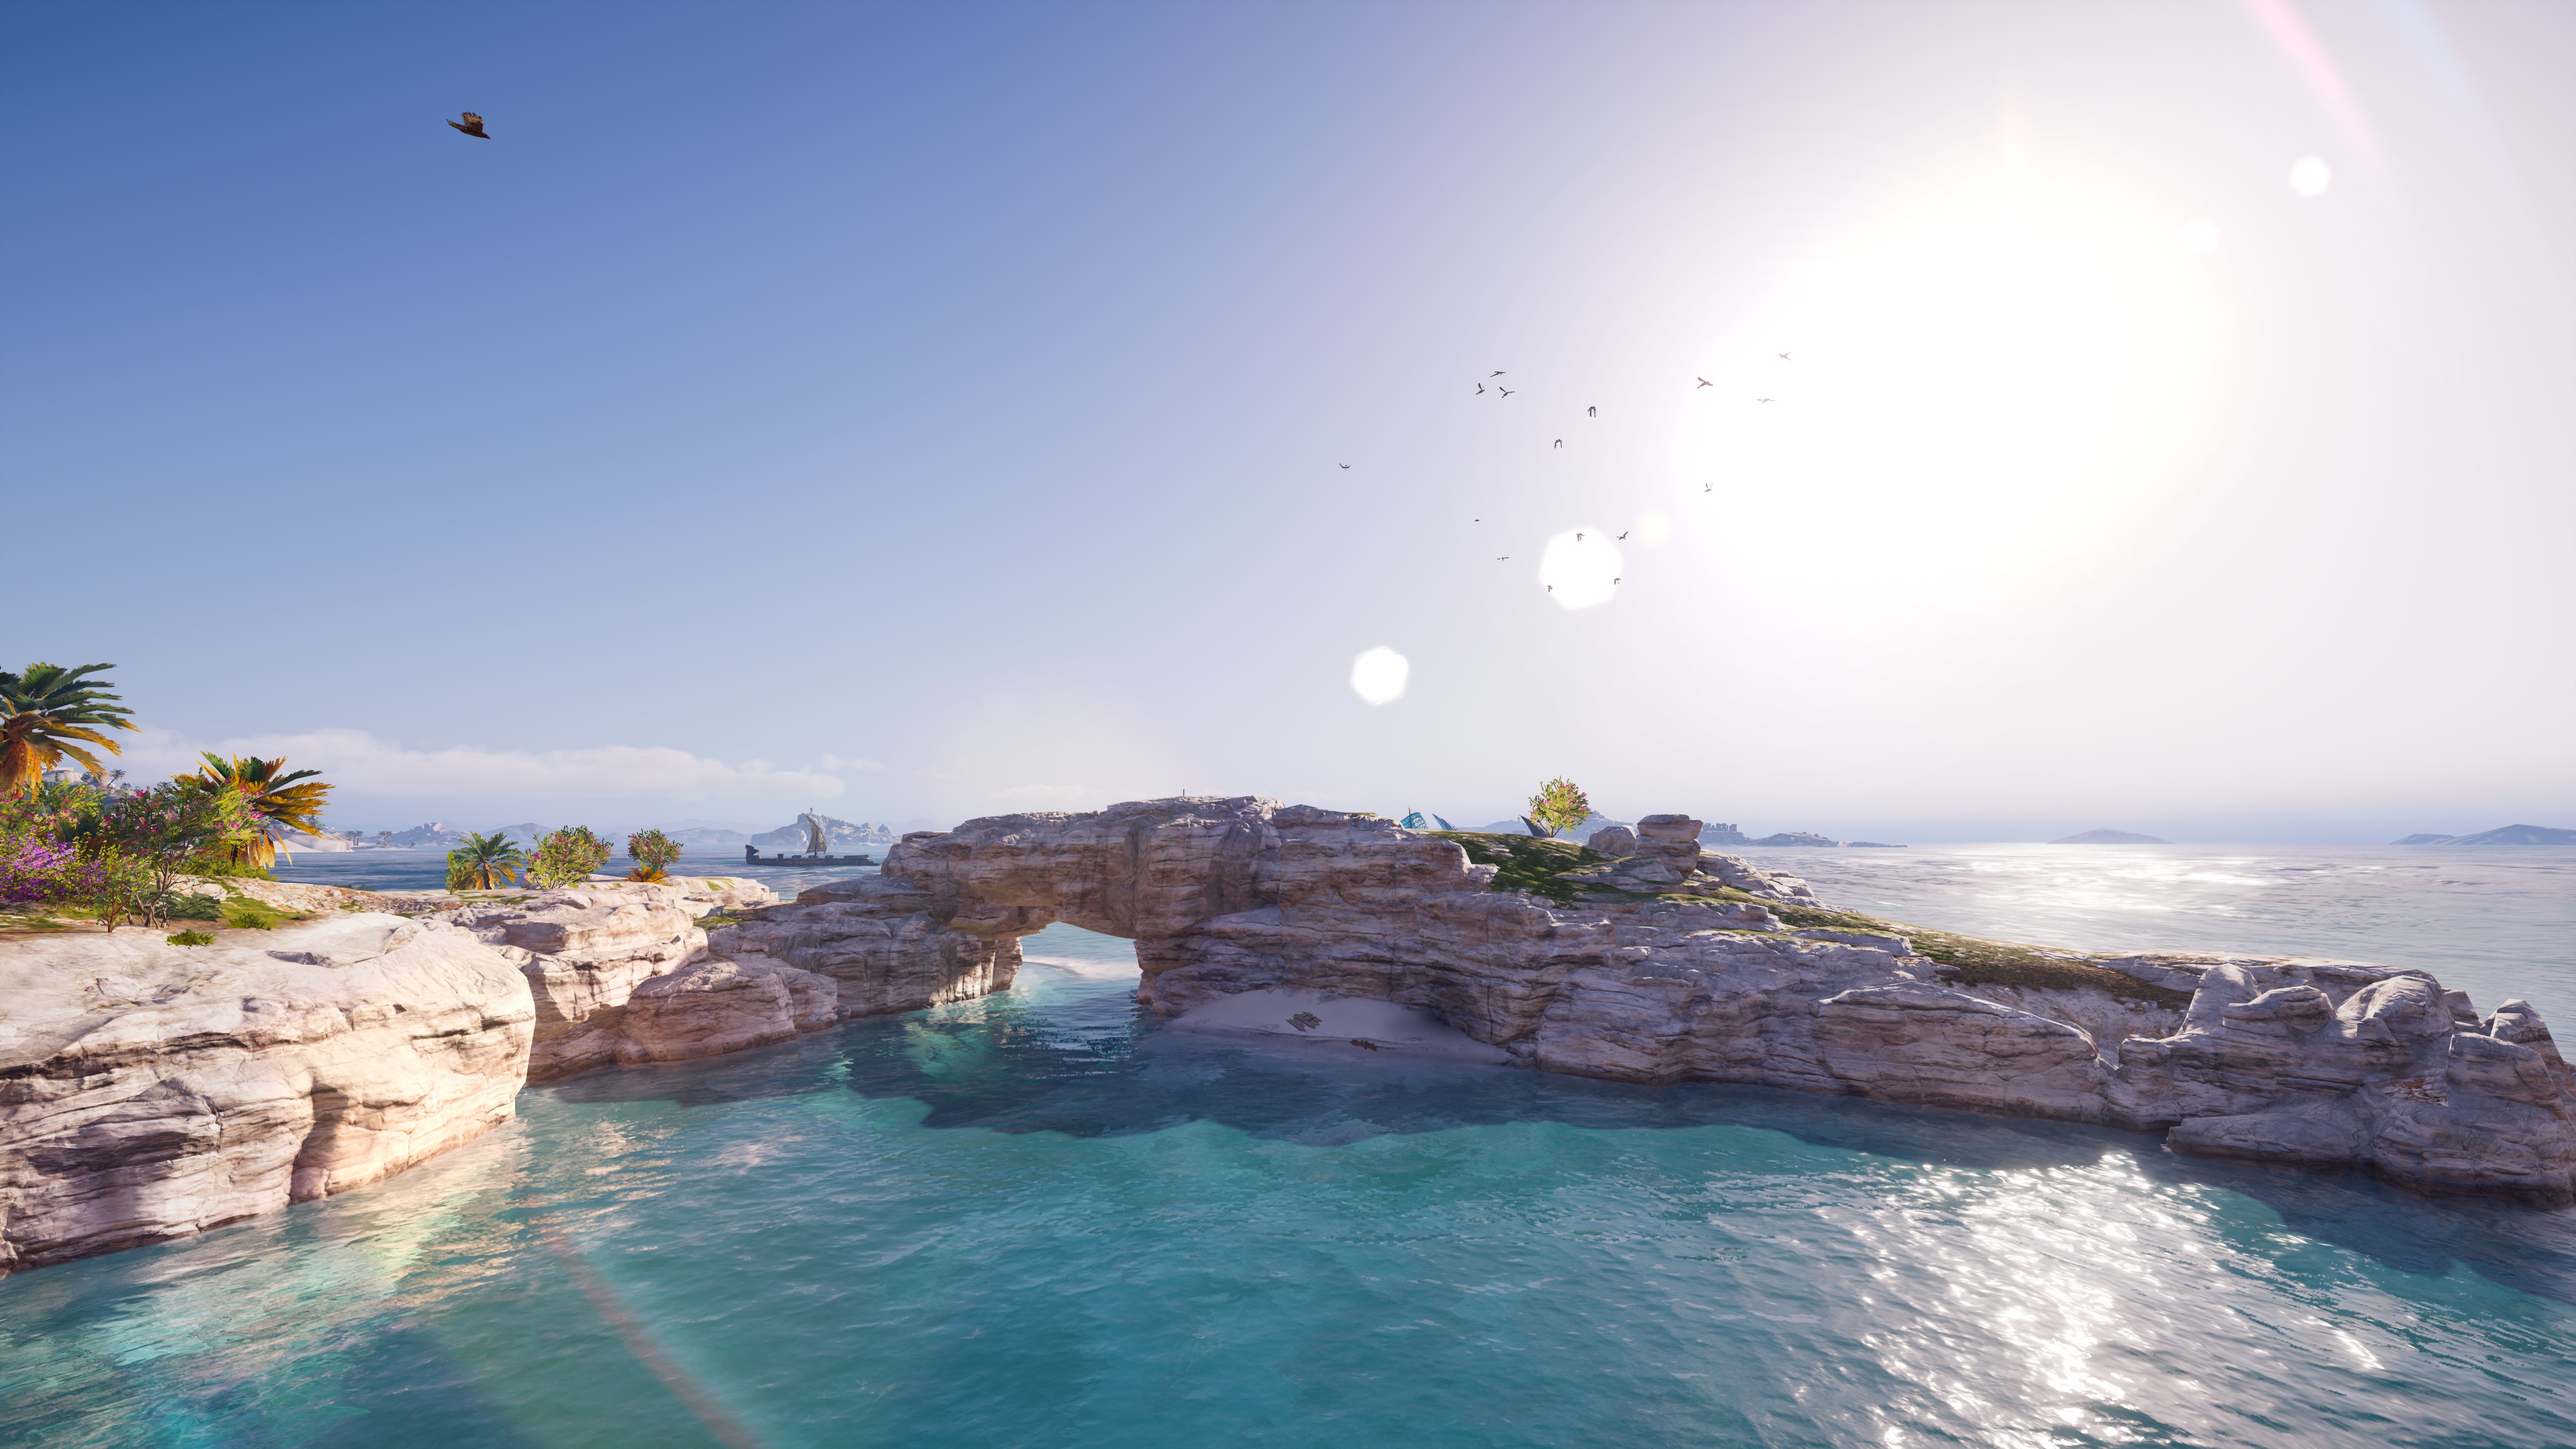 General 3840x2160 Assassin's Creed: Odyssey Assassin's Creed island beach video game landscape video games PC gaming screen shot